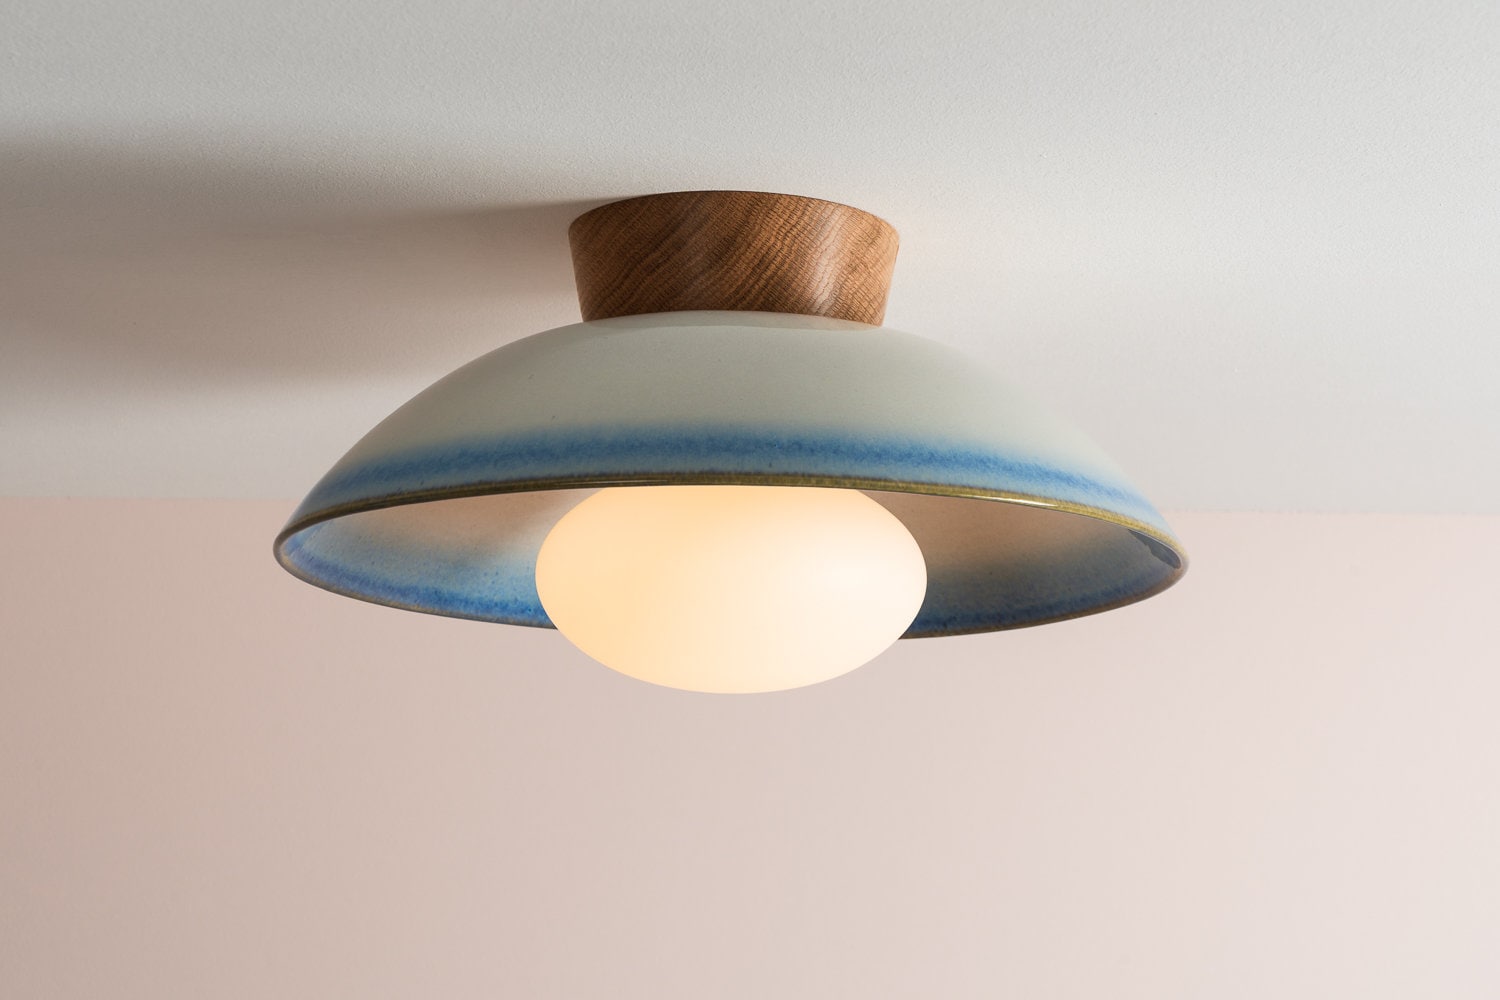 Dawn flush ceiling light in ceramic and oak with a blue and white gloss glaze by StudioHaran